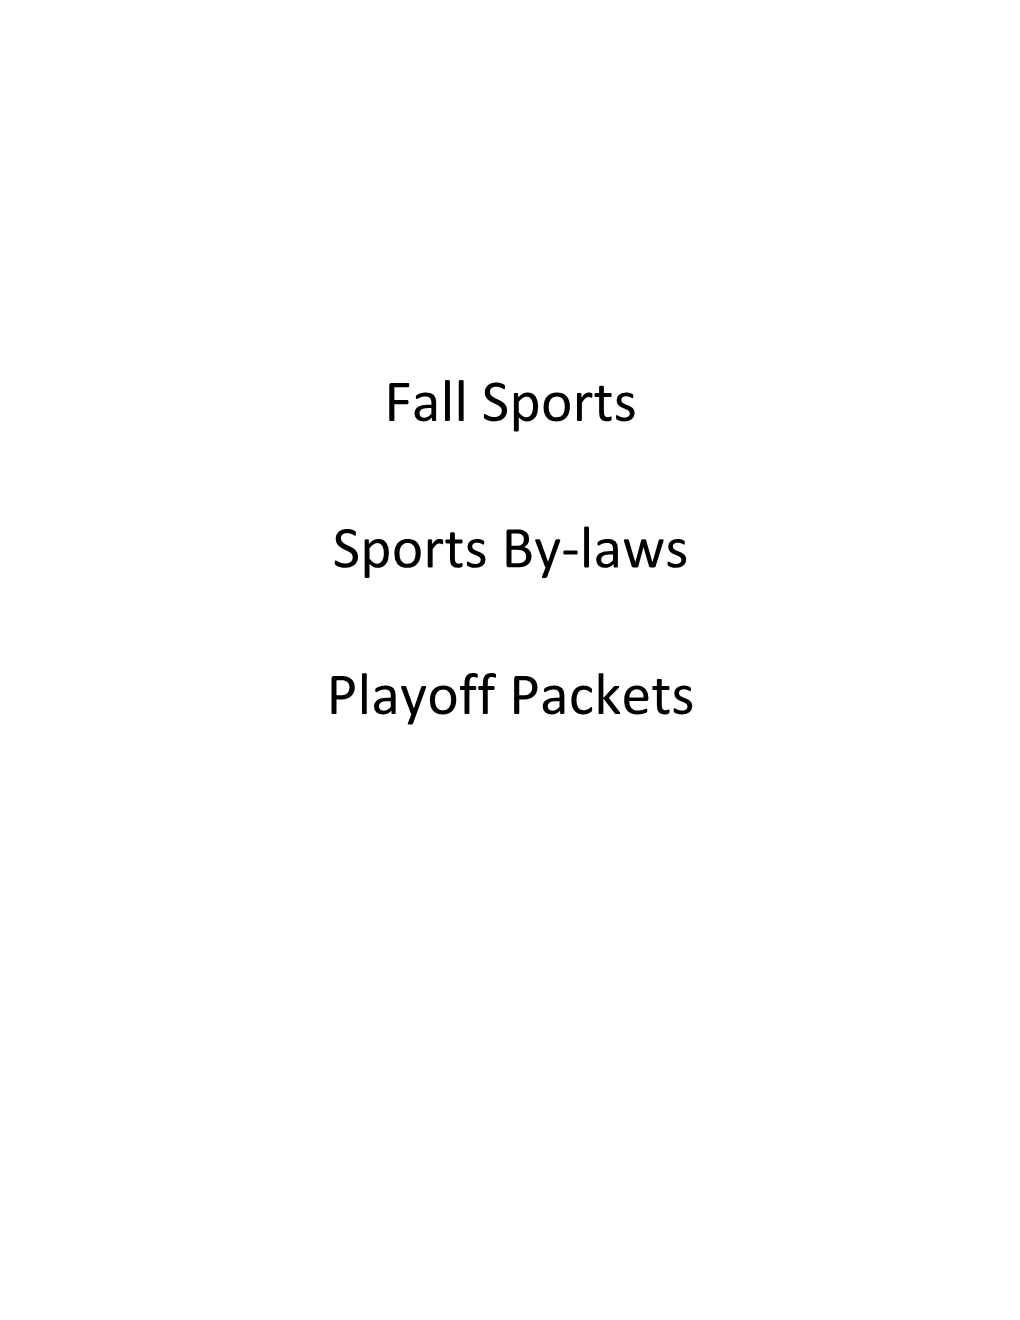 Fall Sports Sports By-Laws Playoff Packets